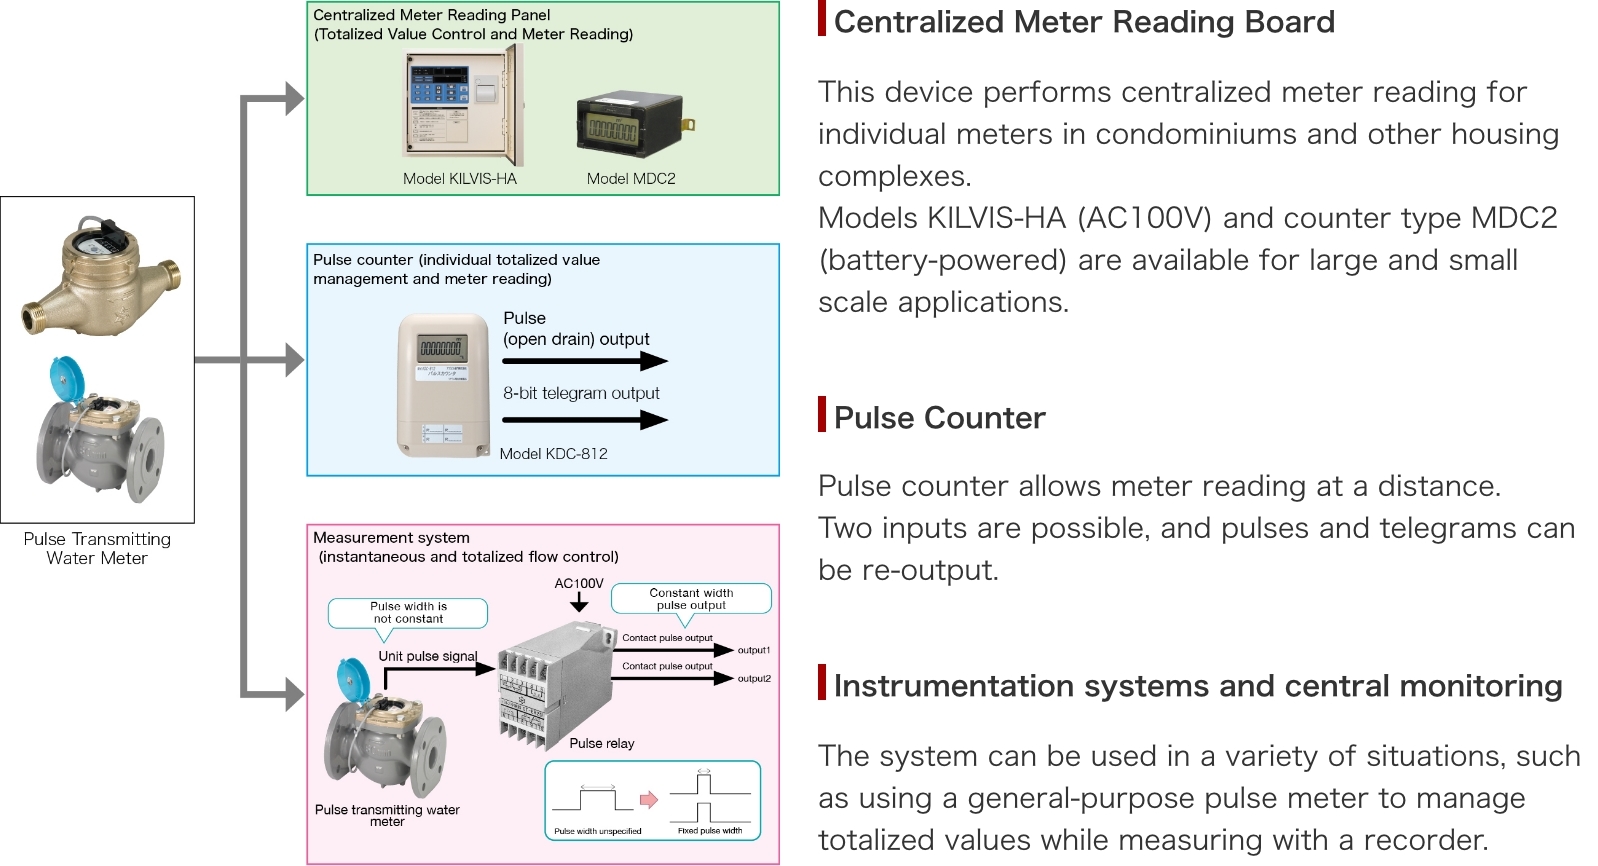 Central meter reading board/pulse counter/instrumentation system and central monitoring